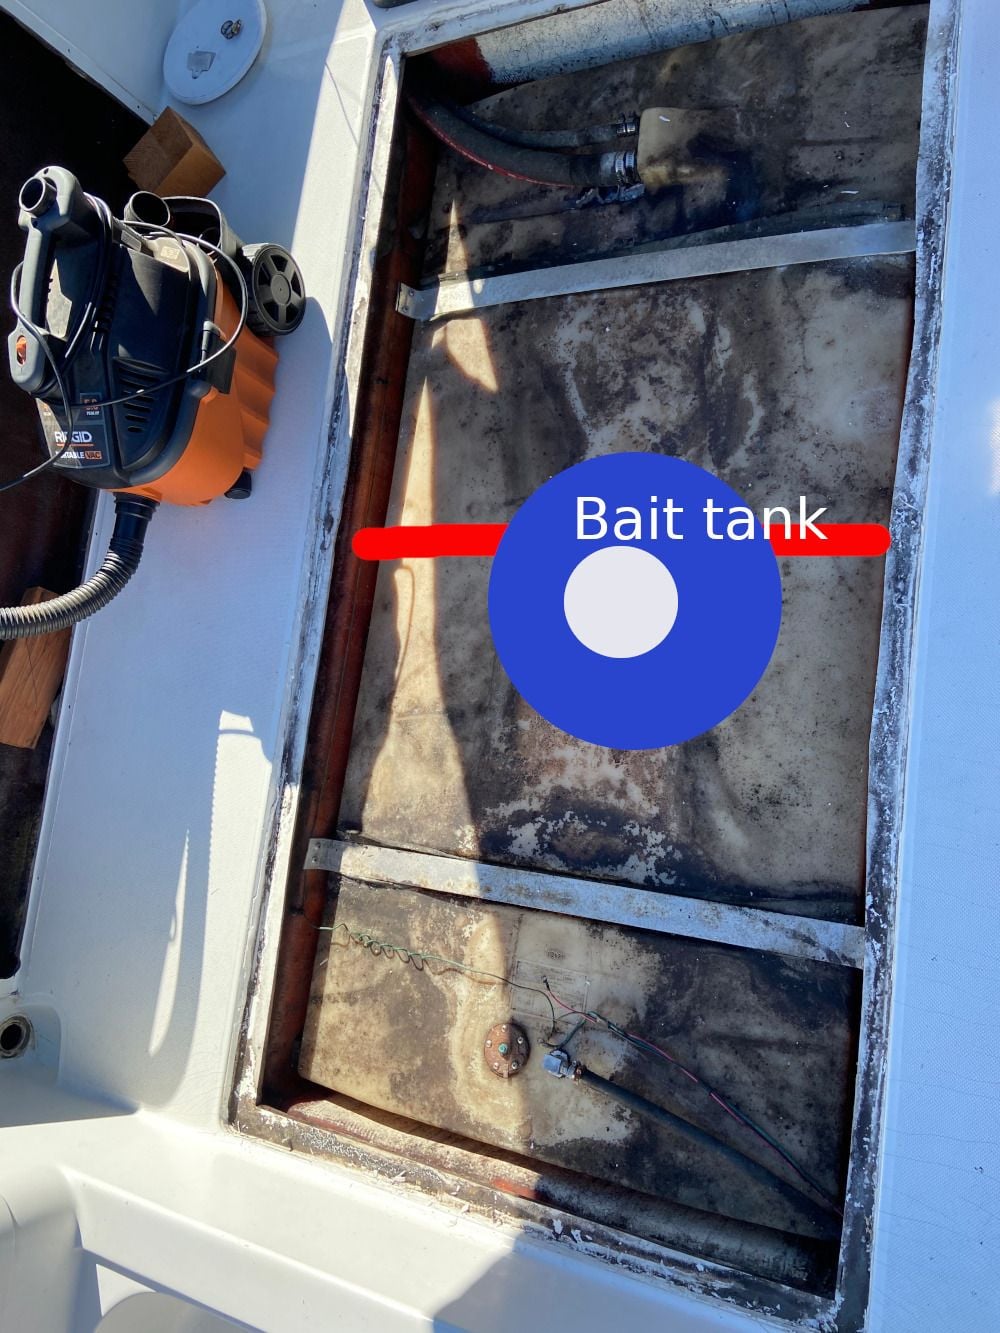 bait tank drain ideas please - The Hull Truth - Boating and Fishing Forum